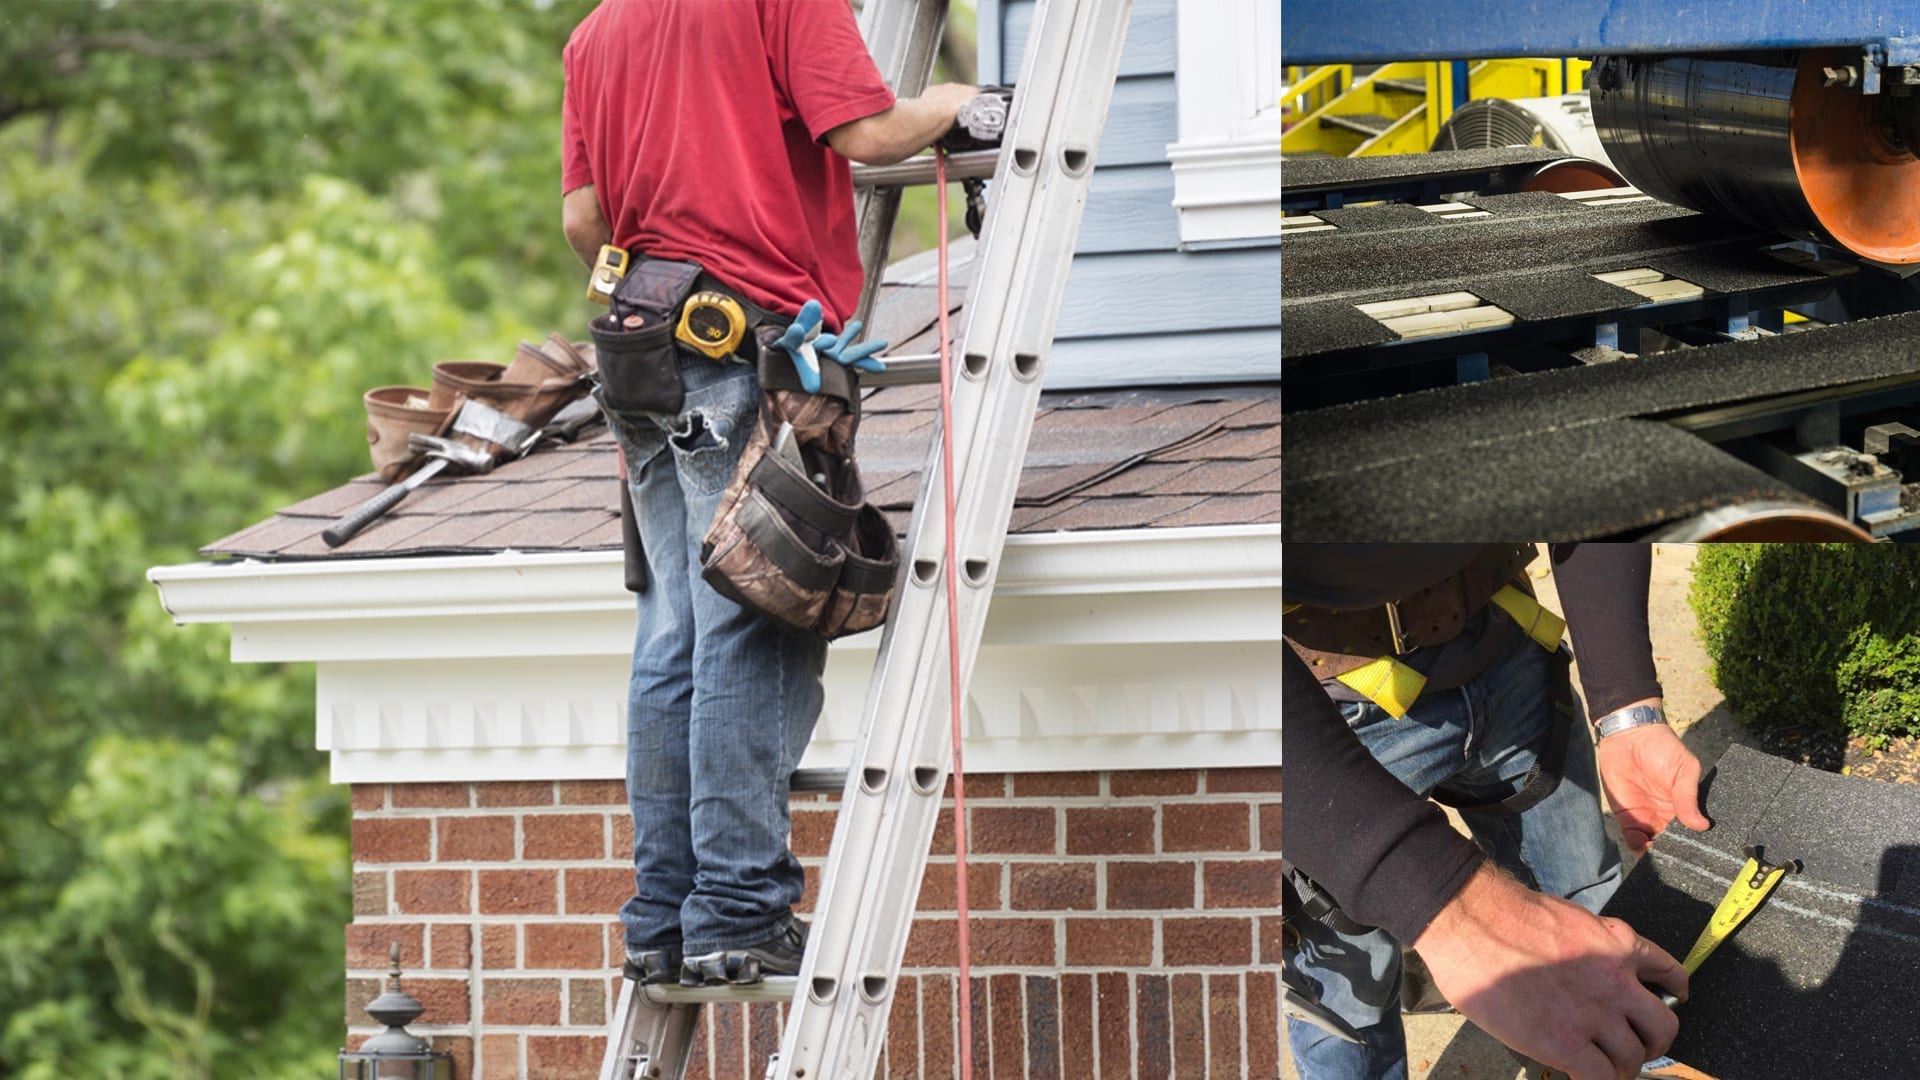 How to Choose a Roof Ladder - The Best Ladders for Working on